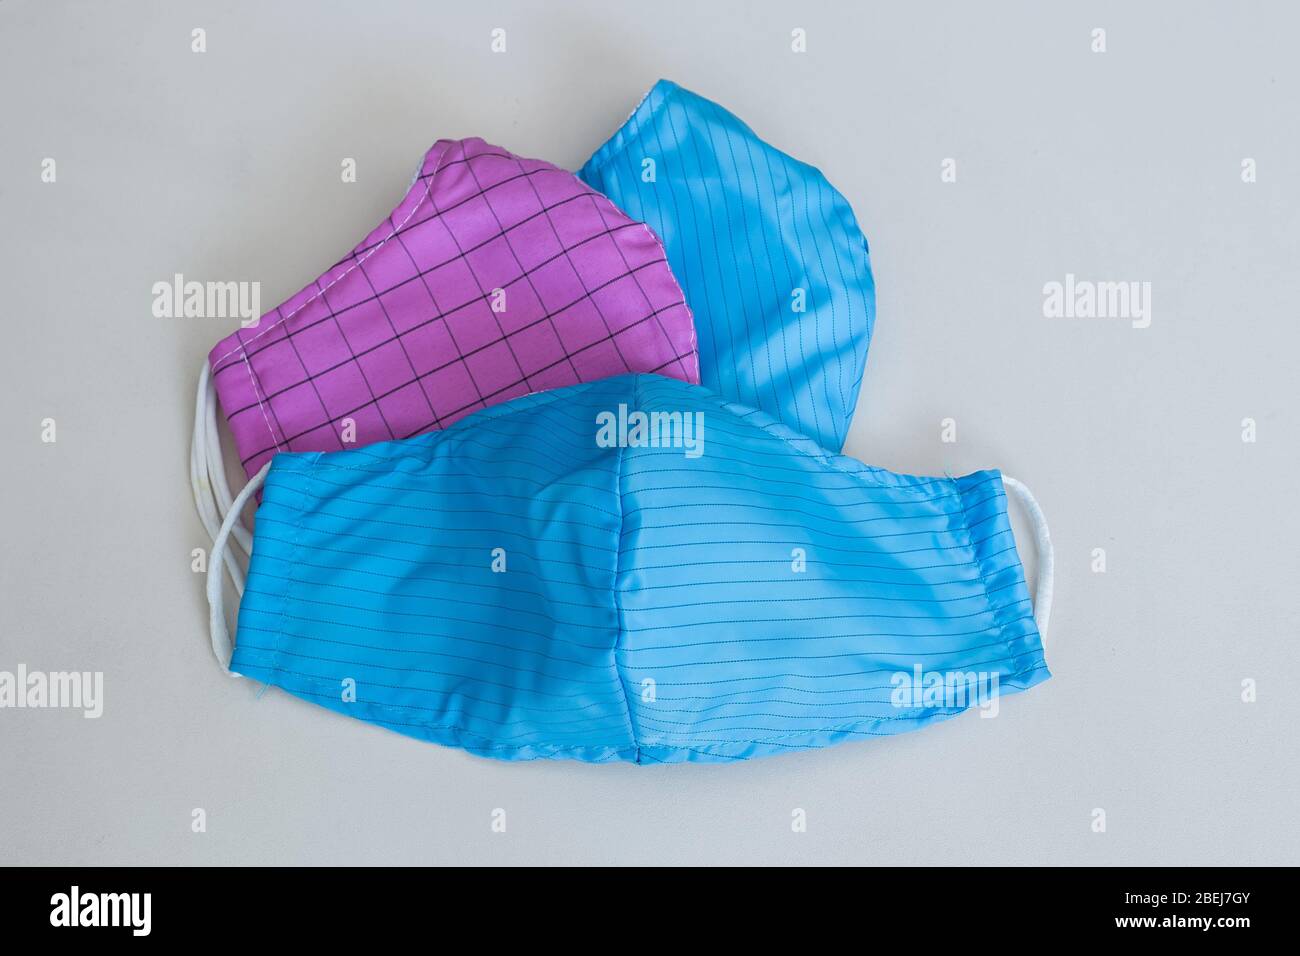 Three anti dust cloth face mask help people avoid getting sick. Typical Vietnamese cloth face mask for pollution and virus outbreak protection Stock Photo